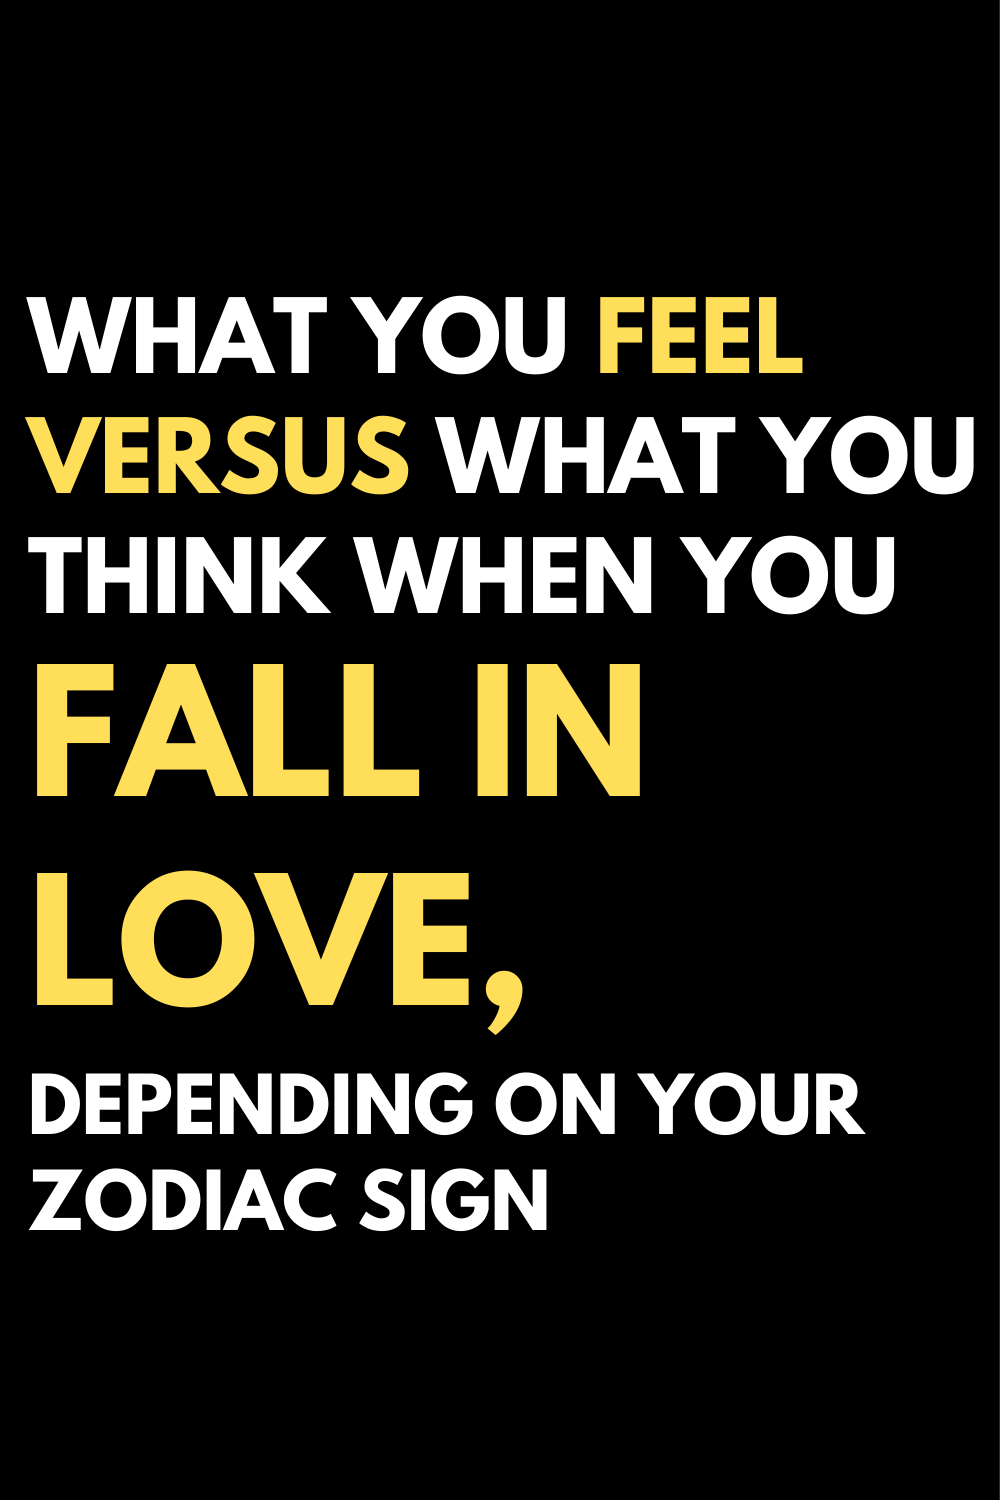 What you feel versus what you think when you fall in love, depending on your zodiac sign